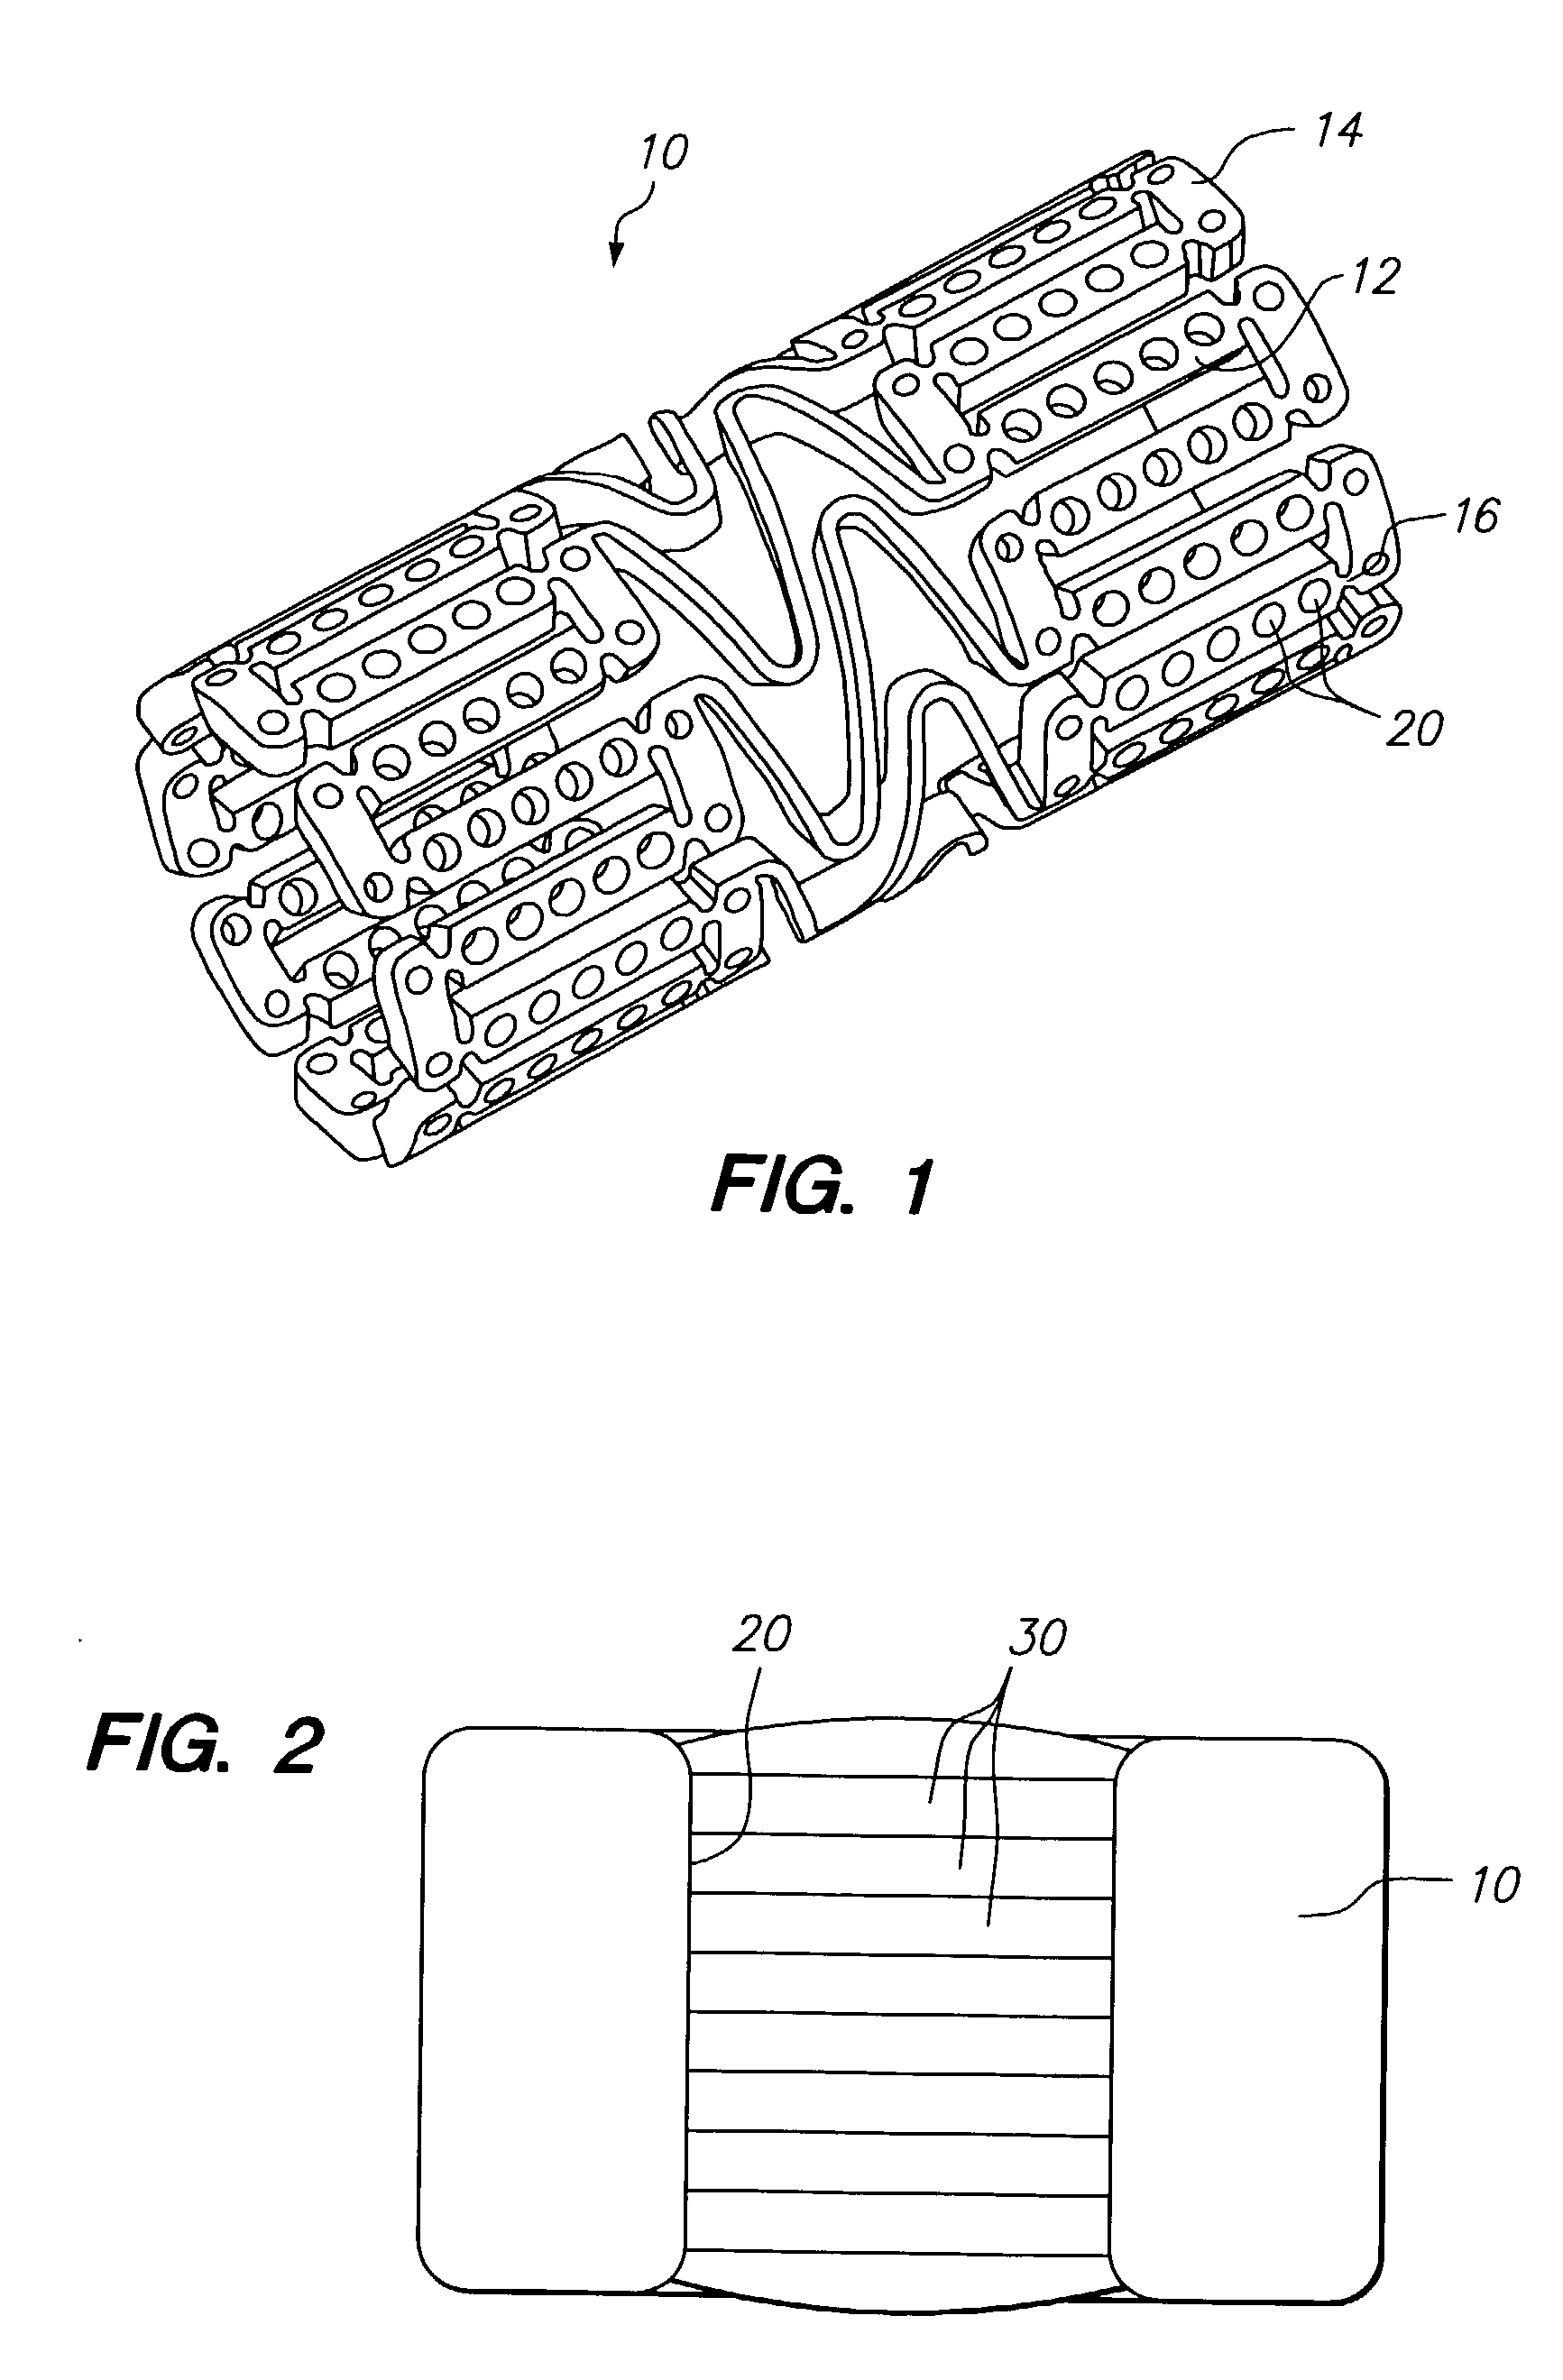 Therapeutic agent delivery device with protective separating layer